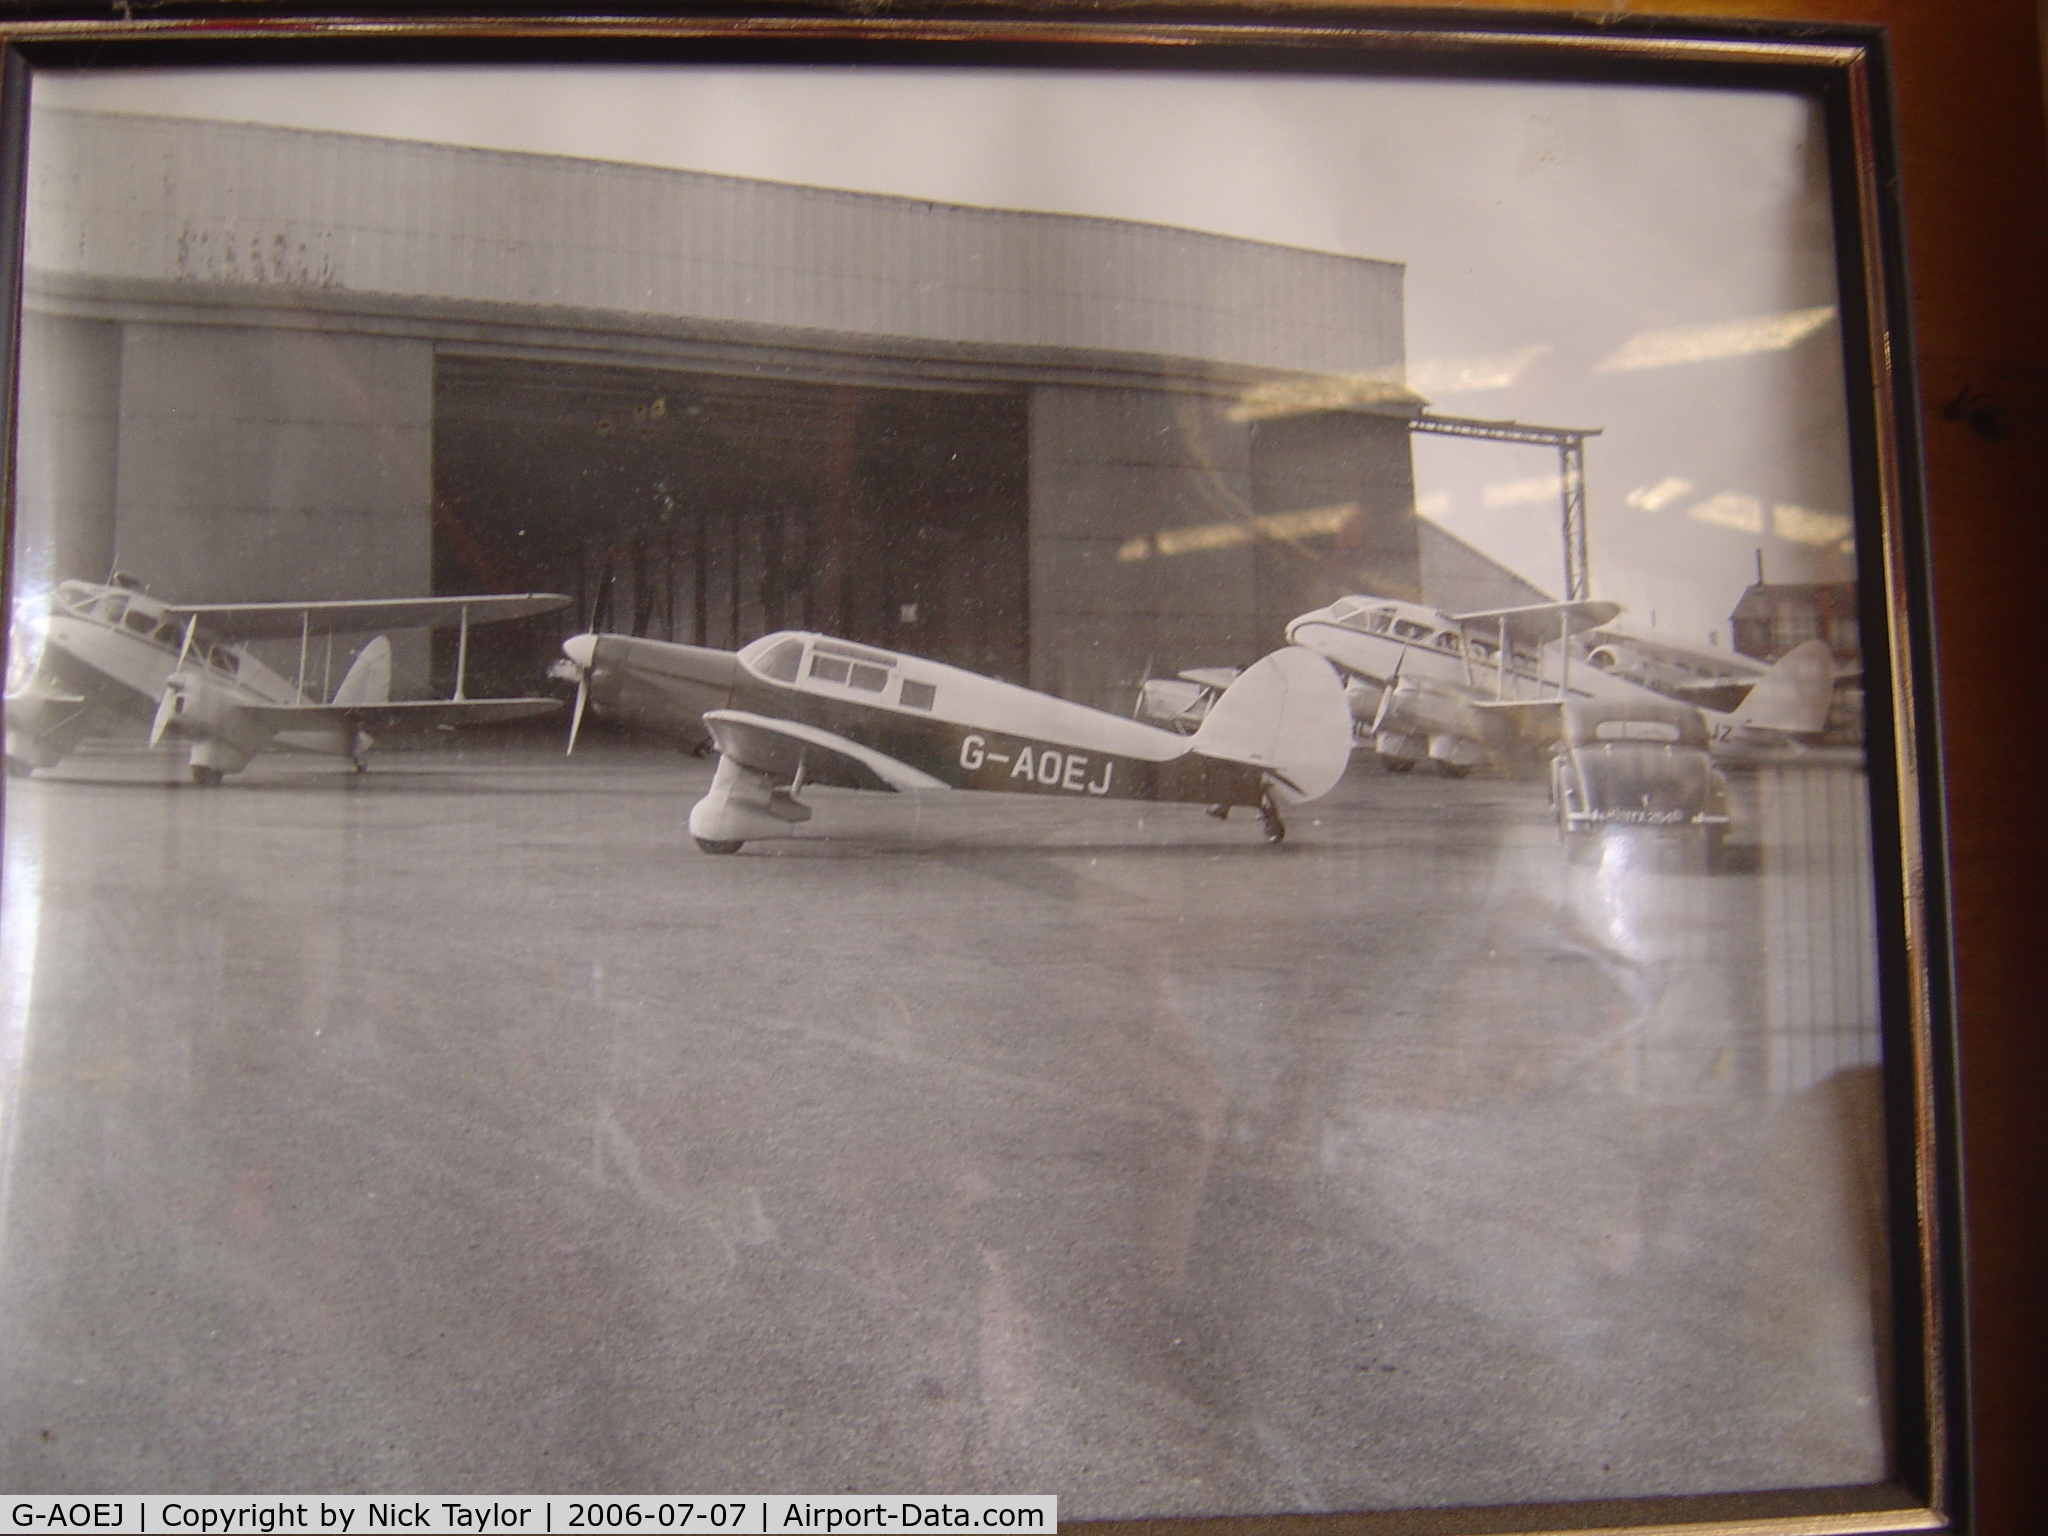 G-AOEJ, F Hills And Sons Ltd Proctor 3 C/N H268, Photo found on the hangar wall. Unknown location/date. Destroyed in fatal take off accident at EGDL 3/19/63.